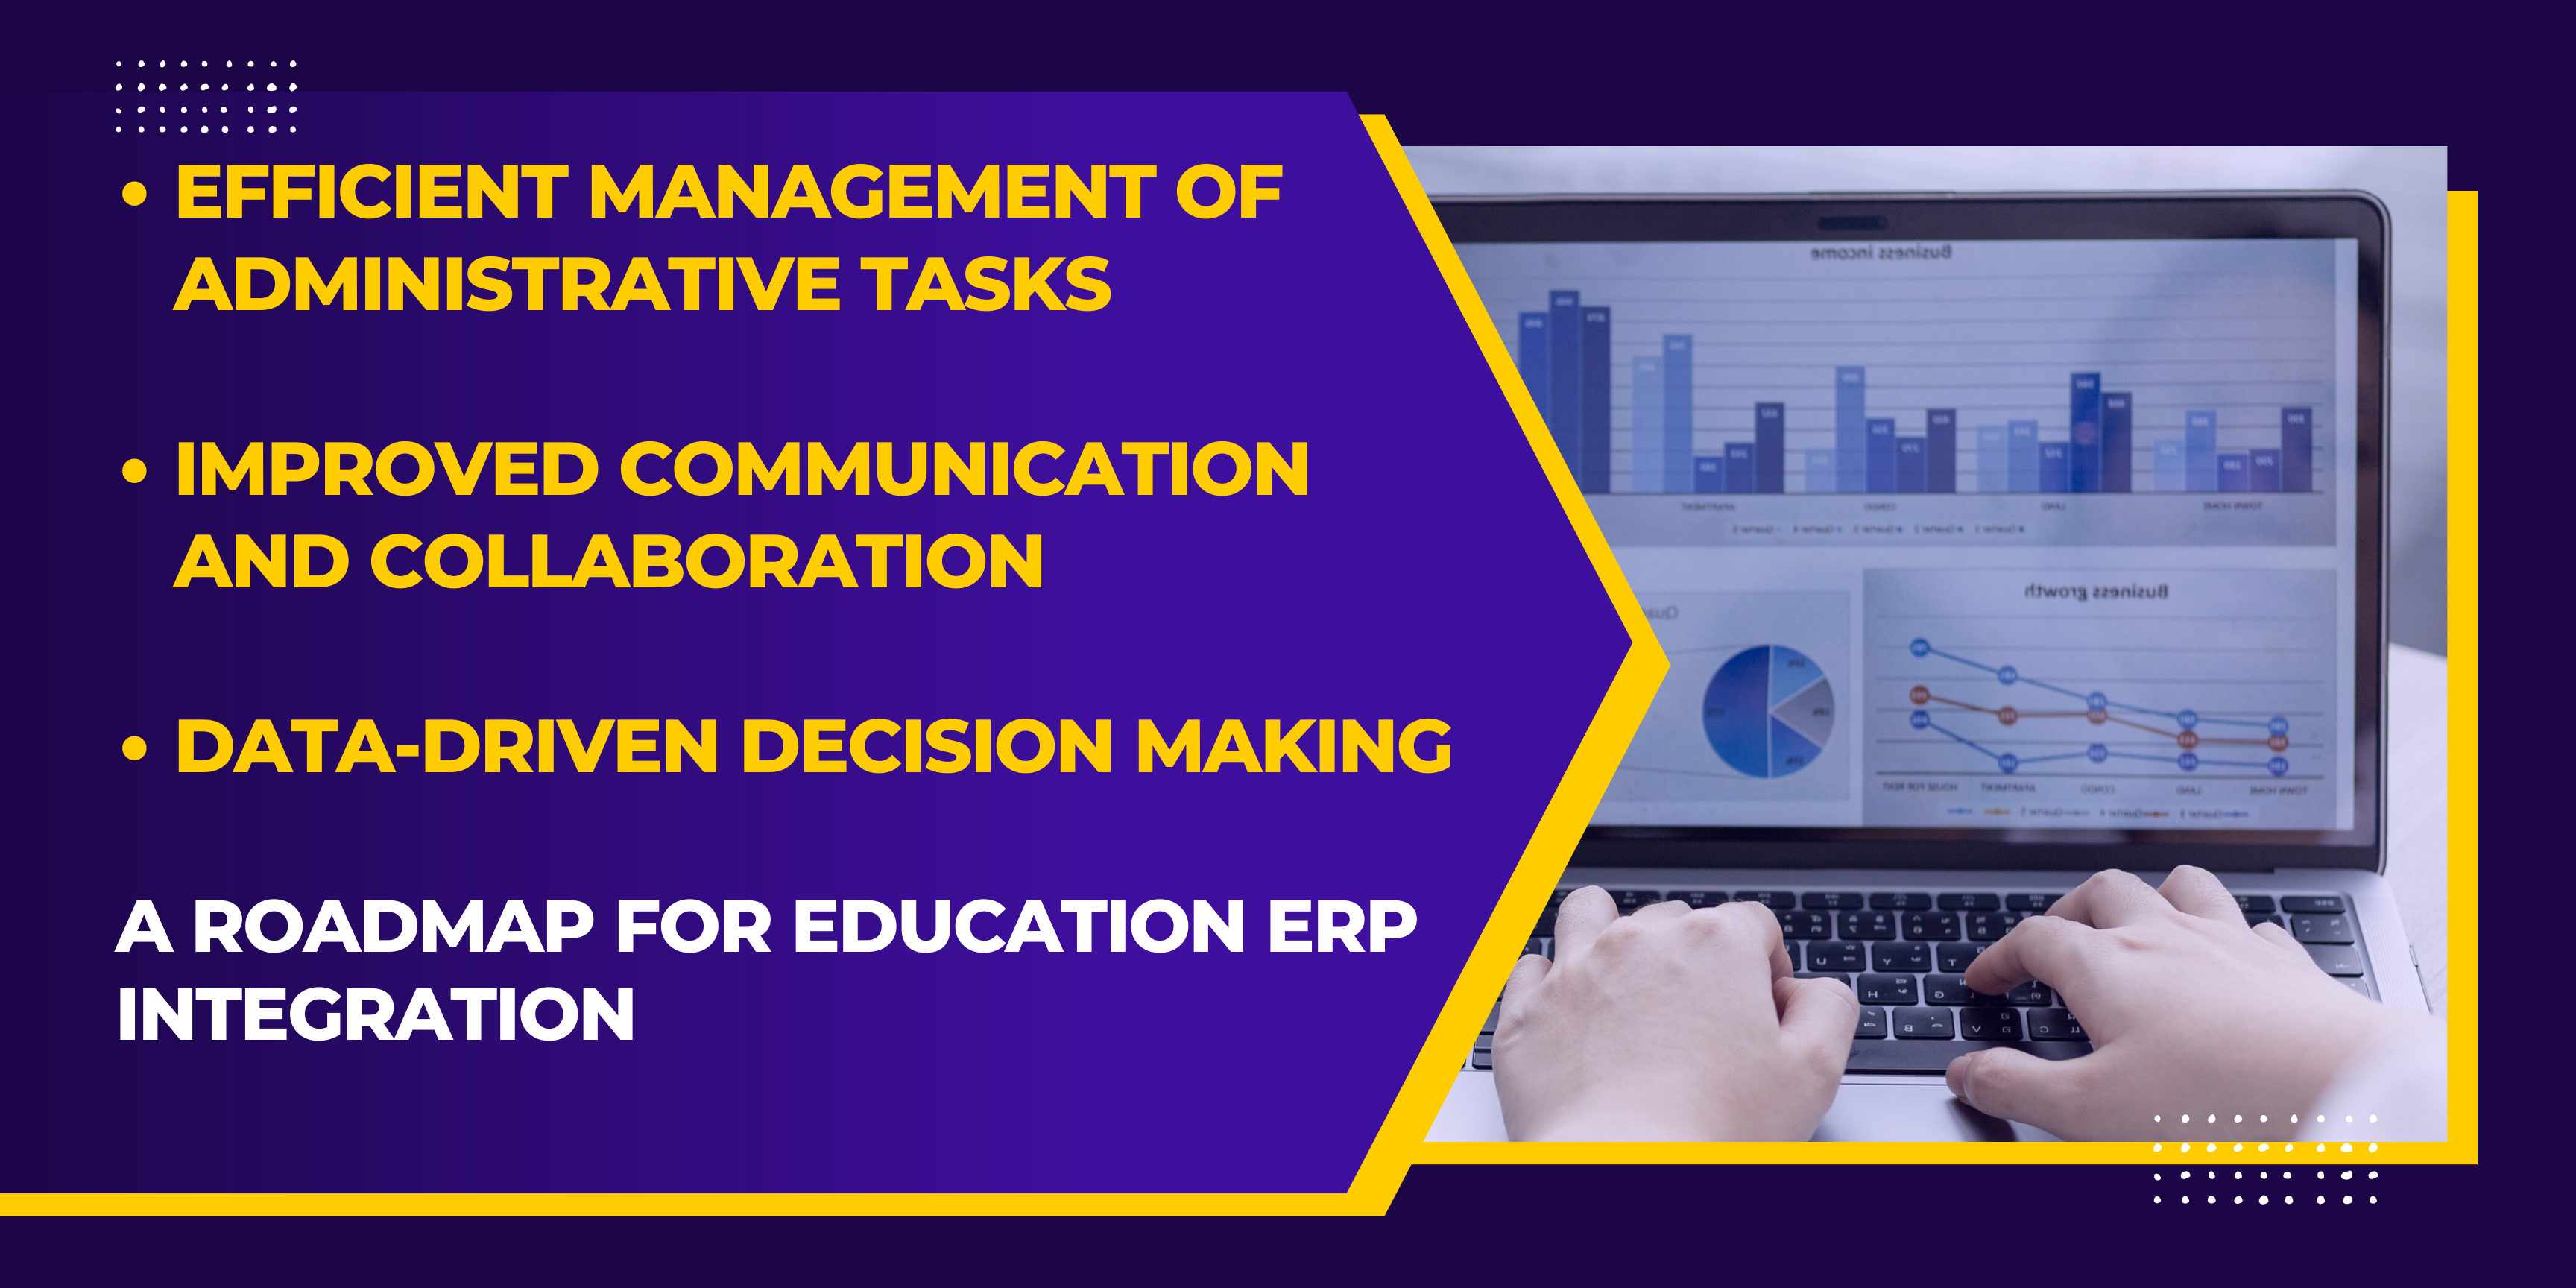 Why Schools & Educational Institutions Need Bespoke ERP Software Solution: A Roadmap for Education ERP Integration